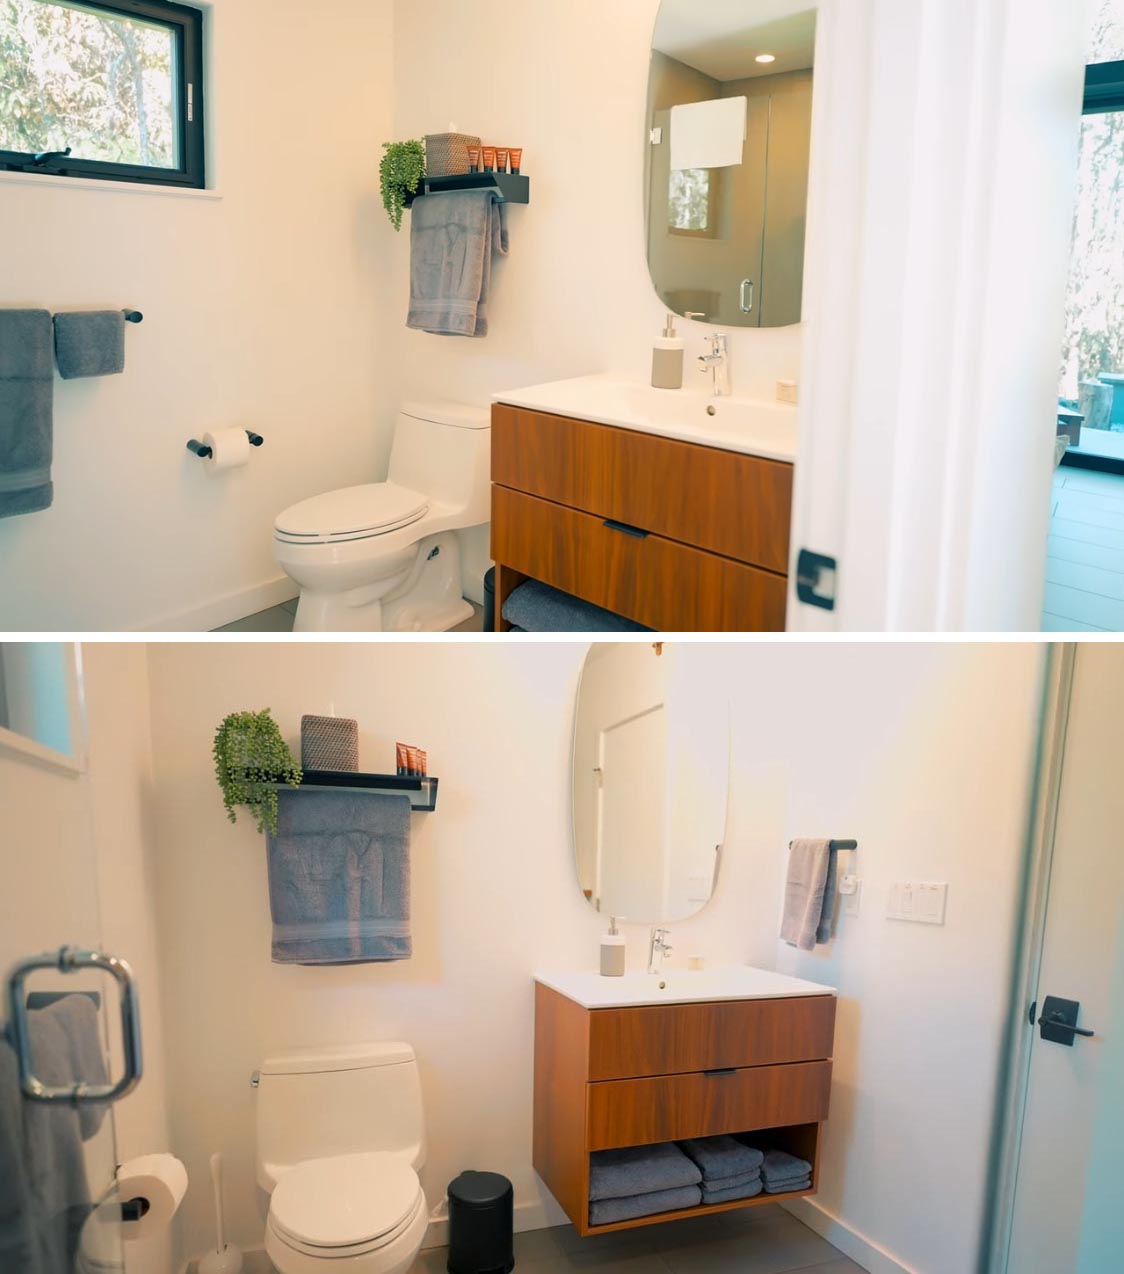 A tiny home bathroom with a wood vanity, a curved mirror, and a glass-enclosed shower.